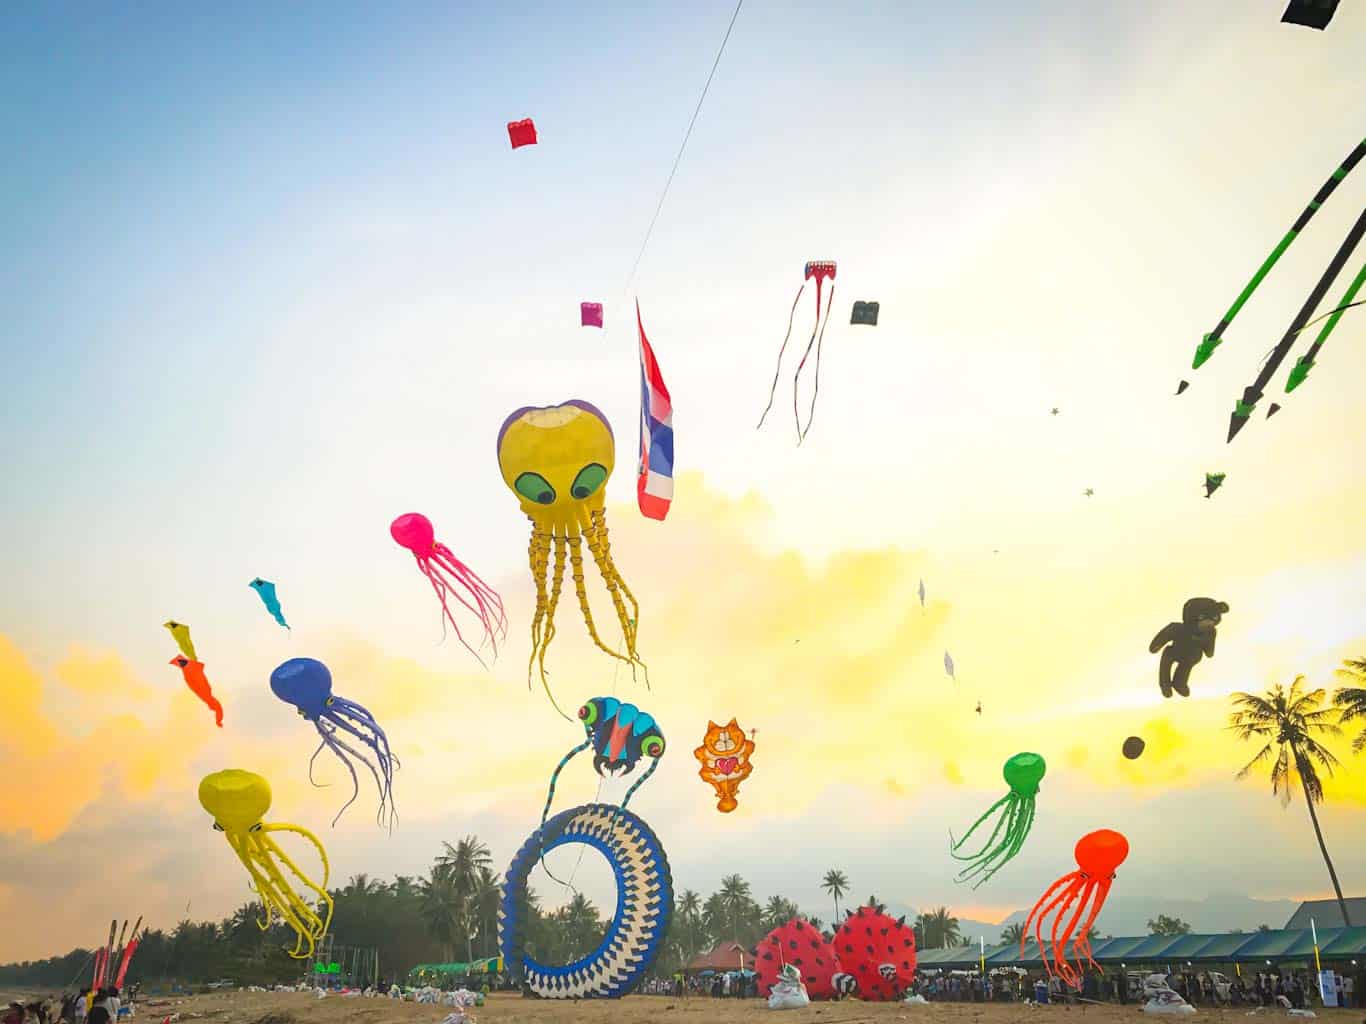 Multiple sizes and shapes of kites flying on beach